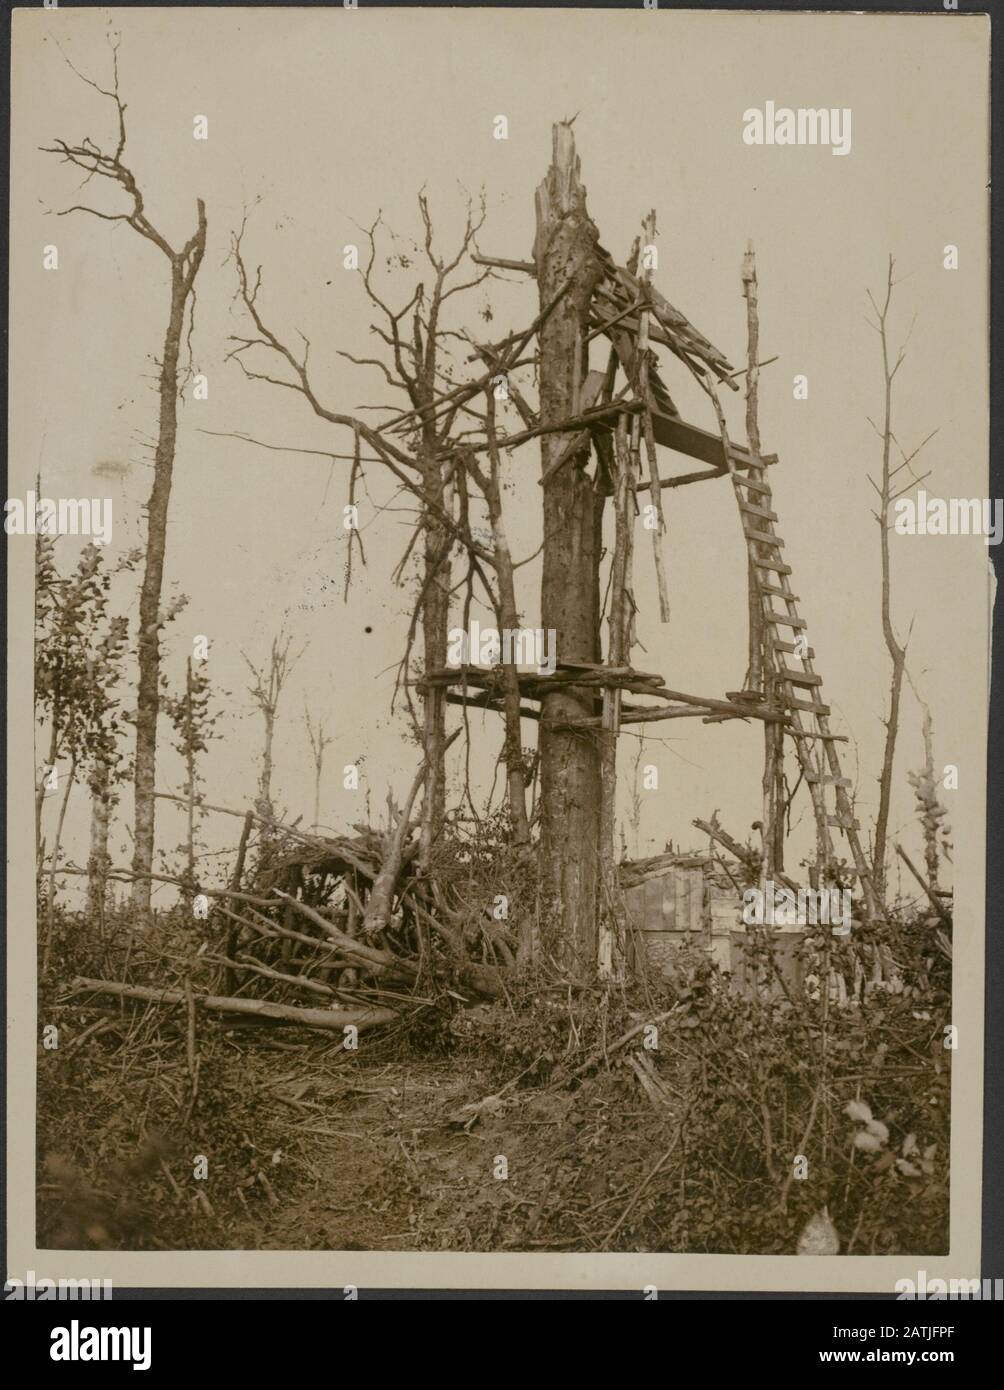 The front in France Description: German observation post at a tree - How many followers on our artillery has had a direct hit Annotation: The front in France. German observatory in a tree where our artillery a hit on'd Date: {1914-1918} Location: France Keywords: WWI, fronts, devastation, observatories Stock Photo